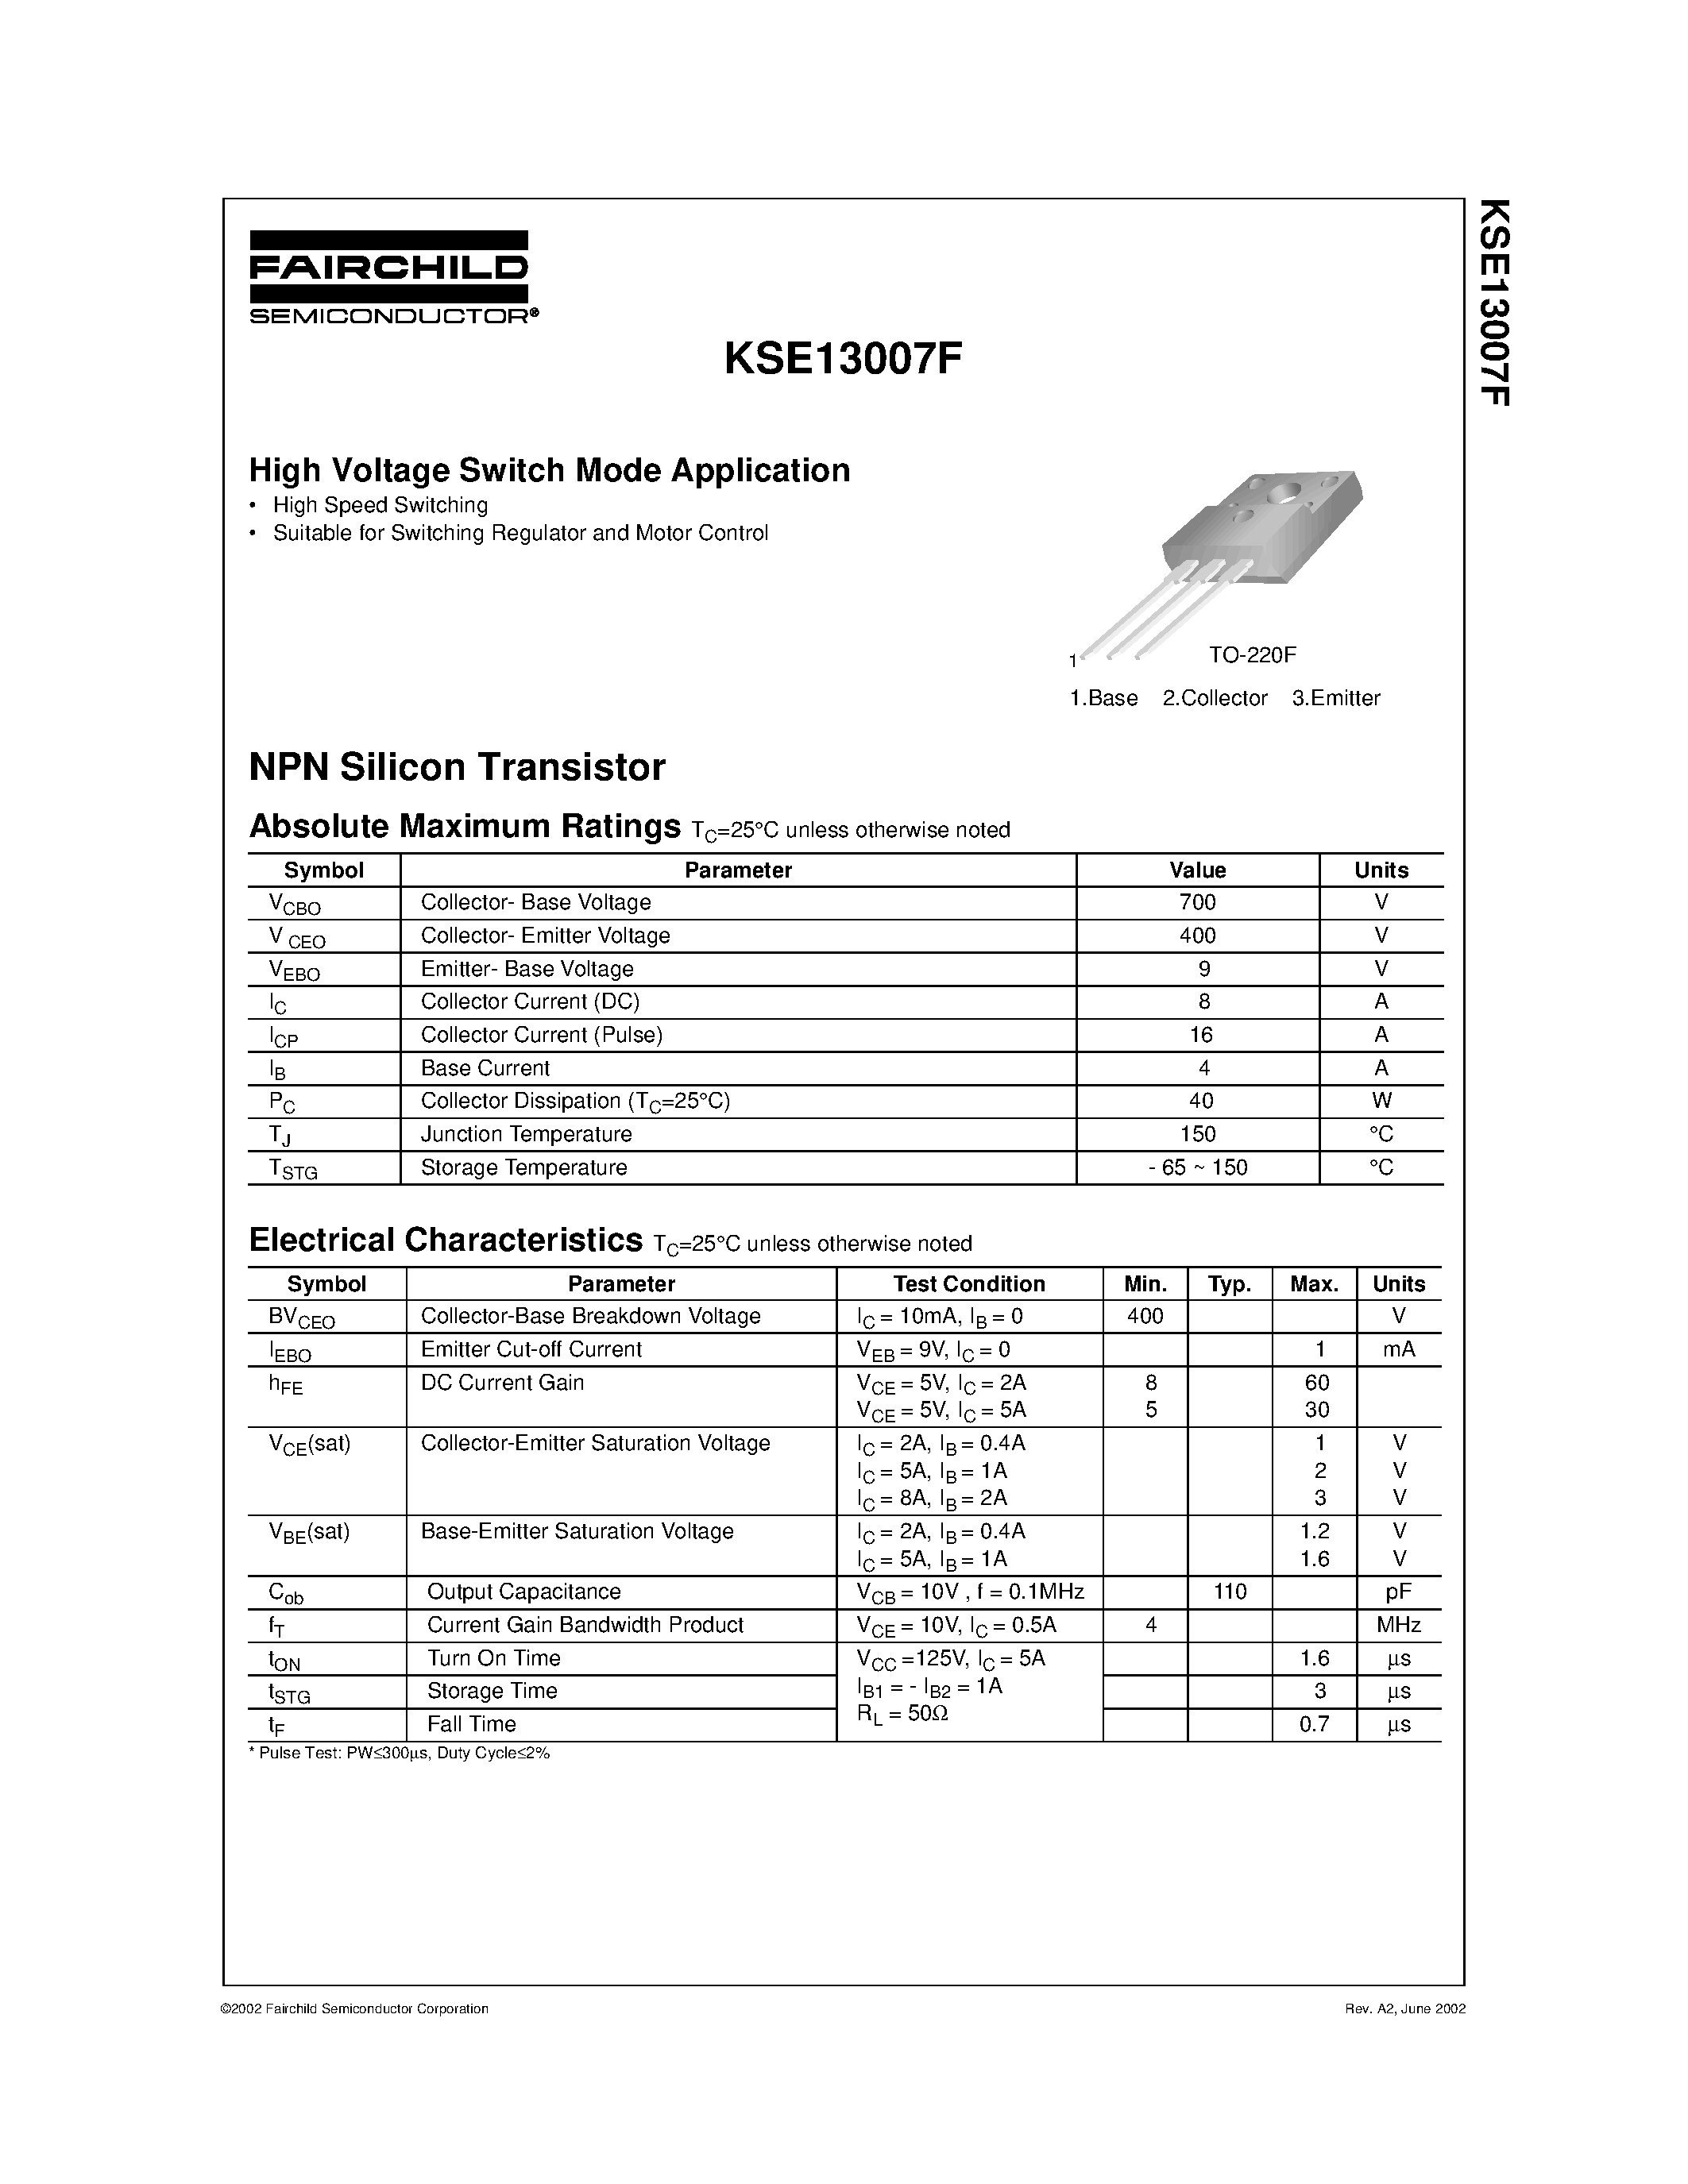 Datasheet KSE13007F - High Voltage Switch Mode Application page 1